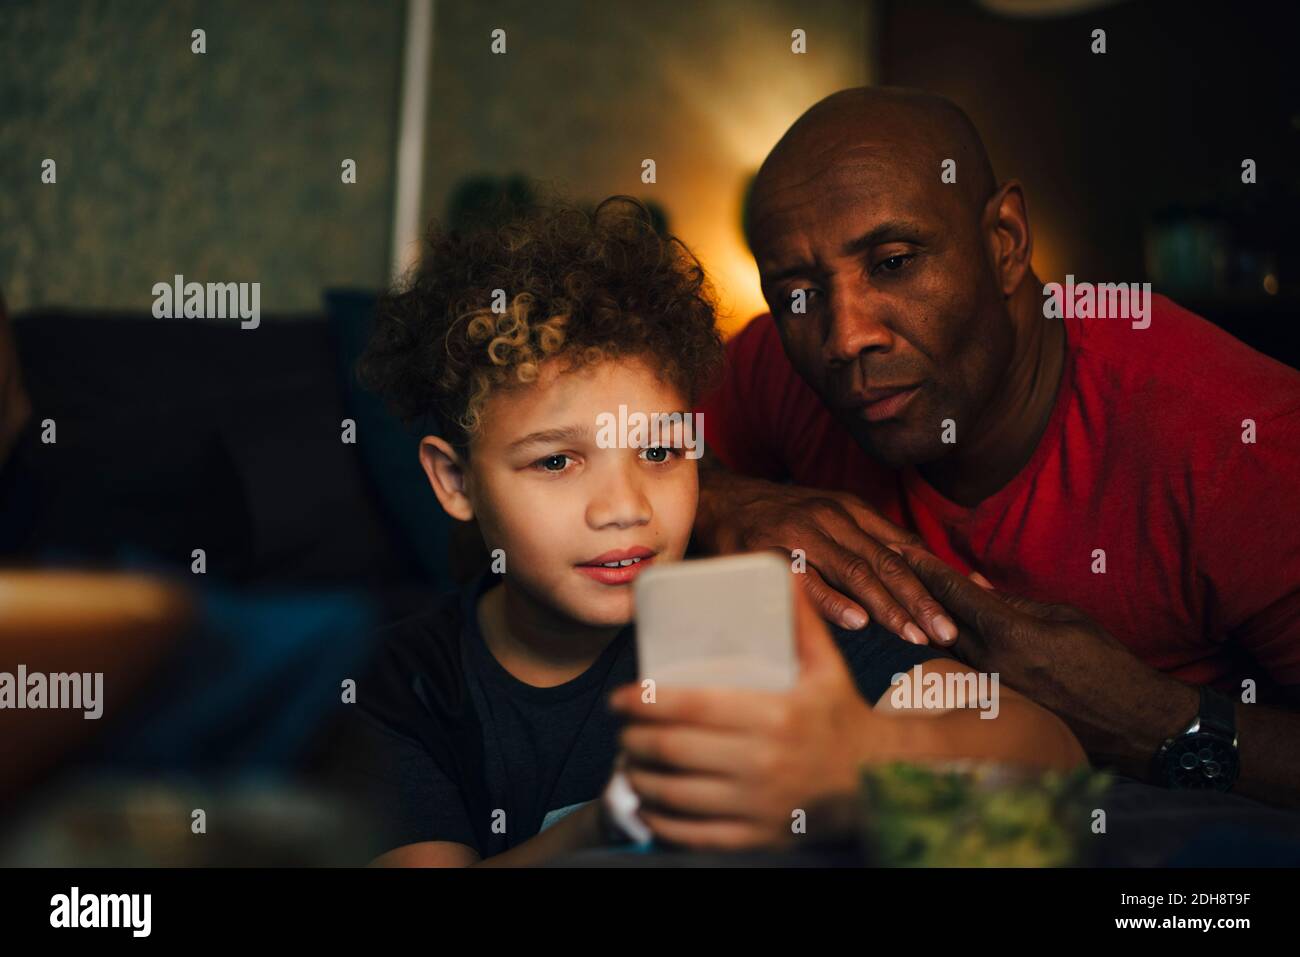 Boy using mobile phone by father in living room at night Stock Photo